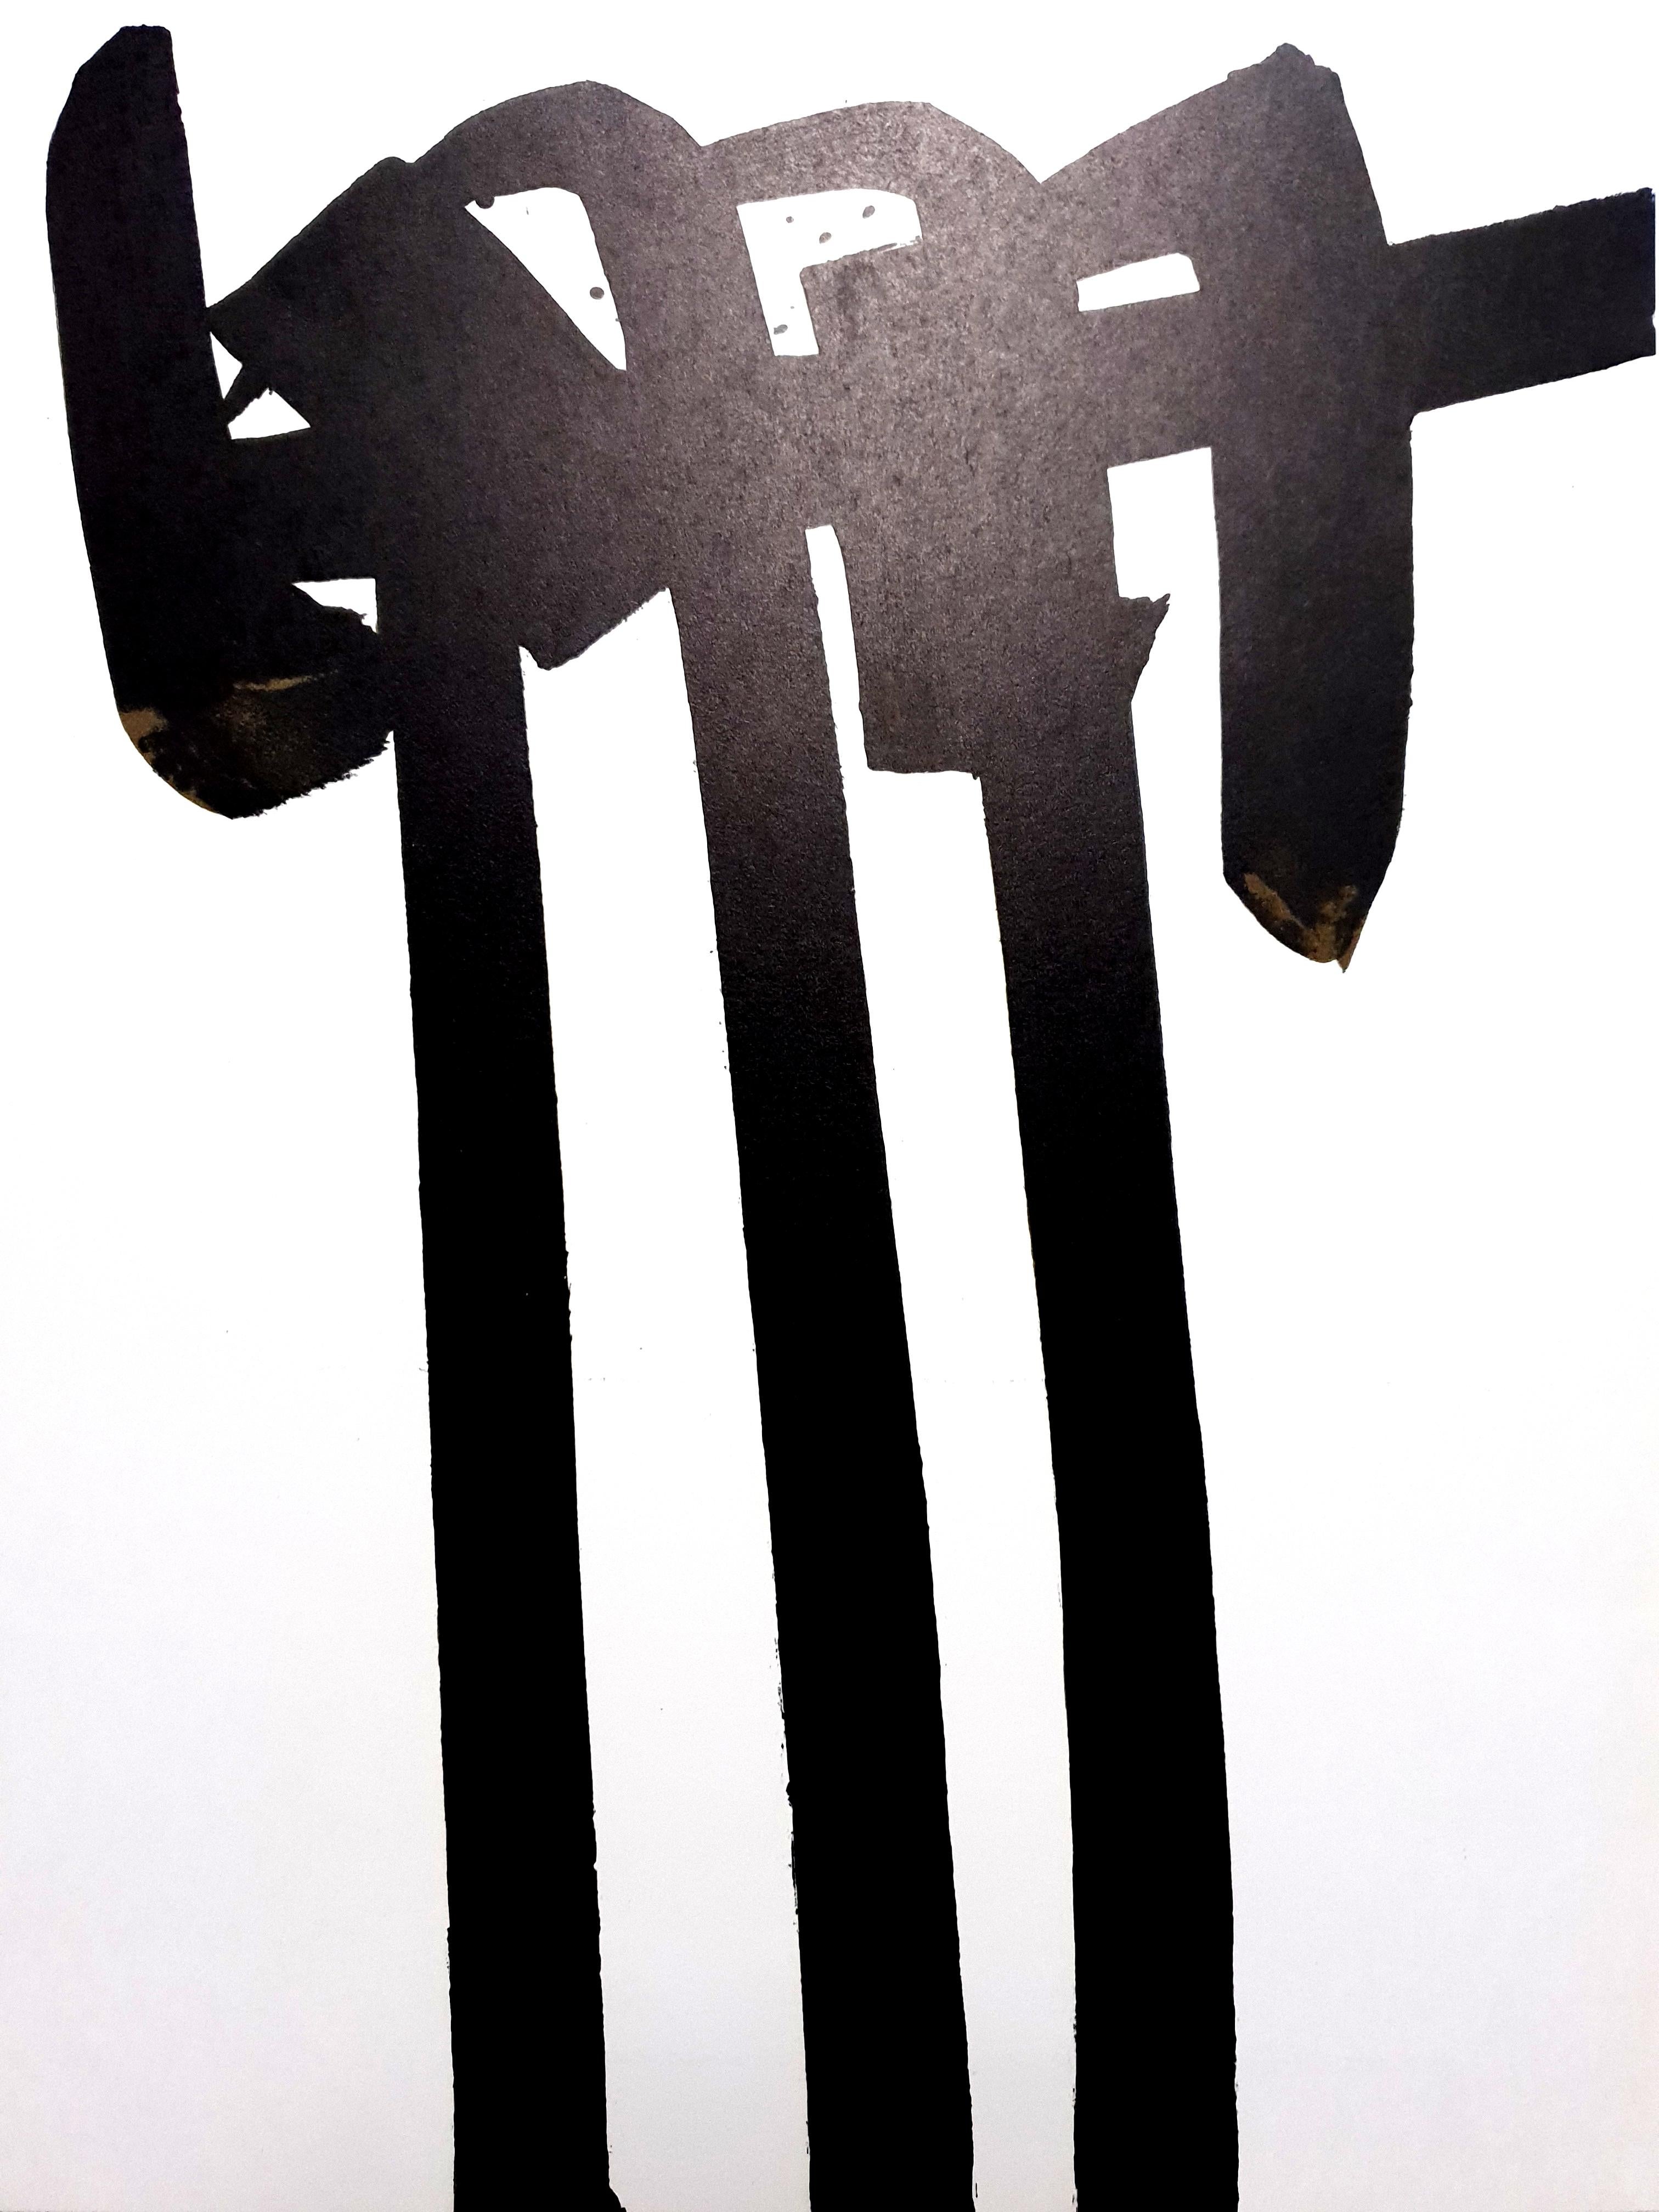 Pierre Soulages - Original Lithograph
Published in the deluxe art review "XXe siècle"
1970
Dimensions: 32 x 24 cm

Pierre Soulages or the "painter of black" as he is often referred to, has rightfully become one of the key international figures of